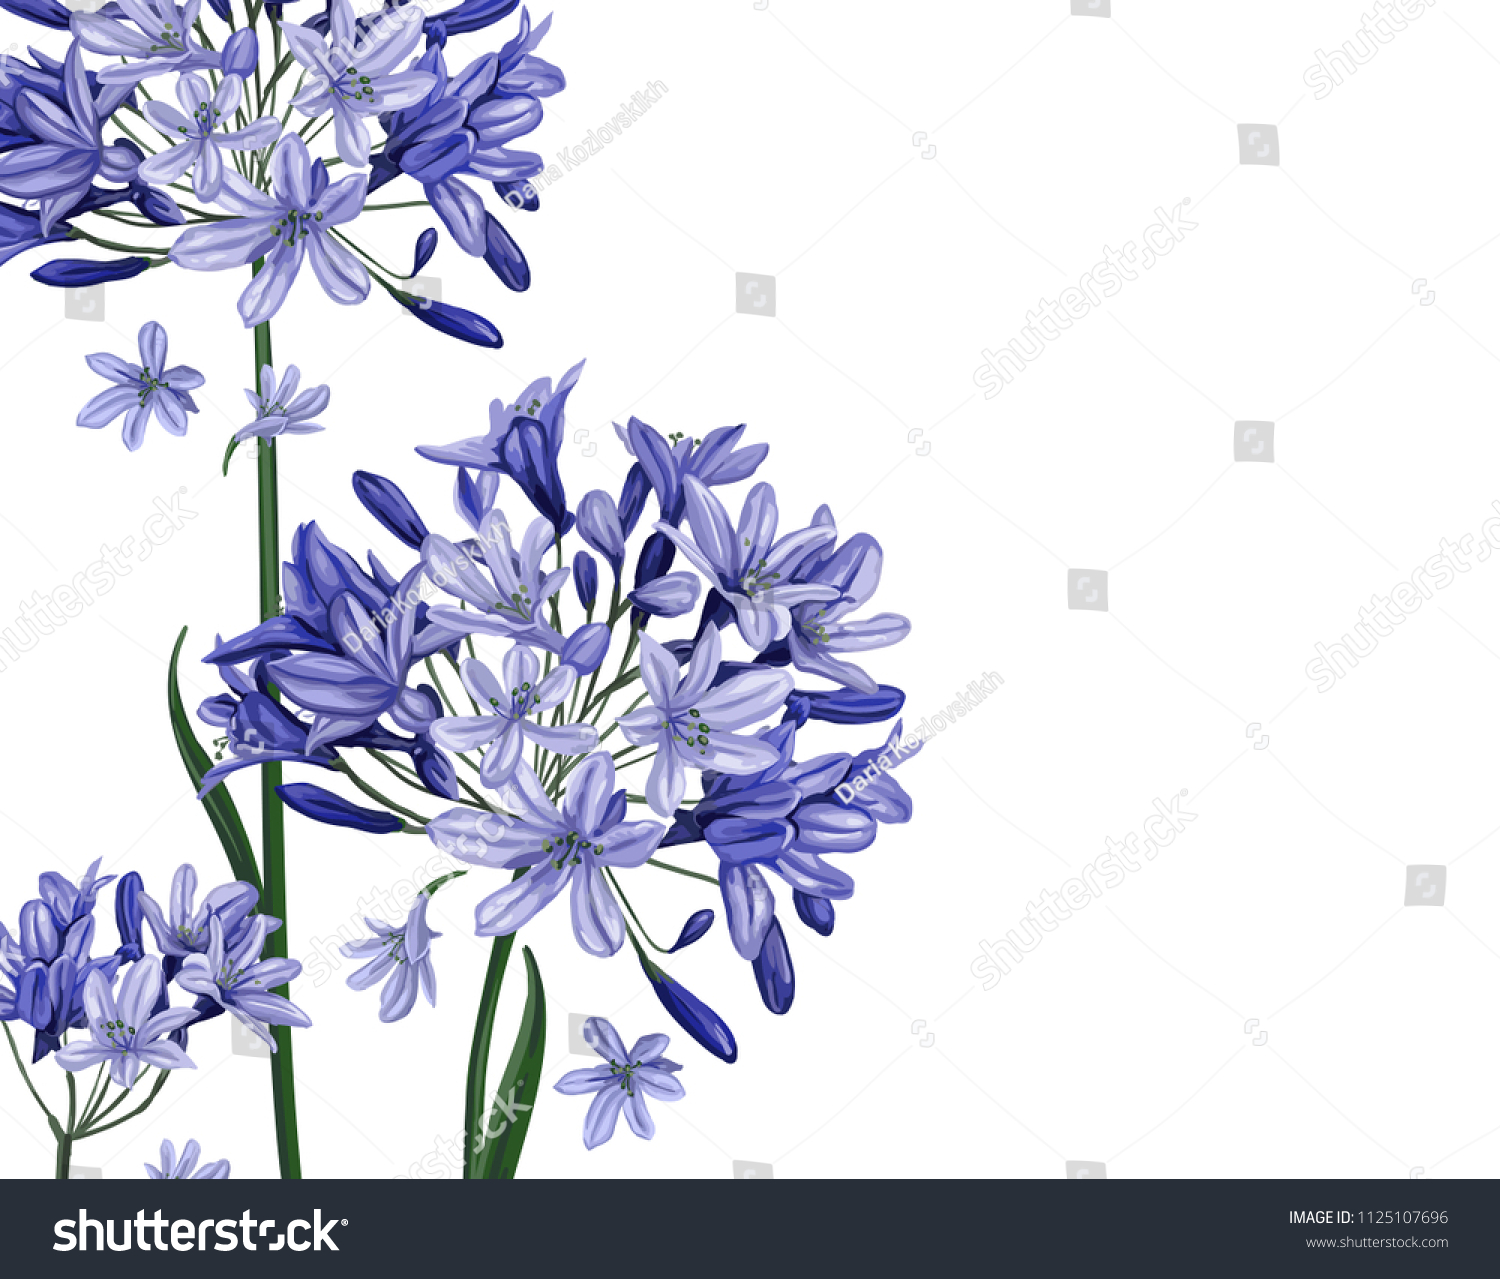 SVG of 
Decorative card. Beautiful blue flowers on a white background. svg